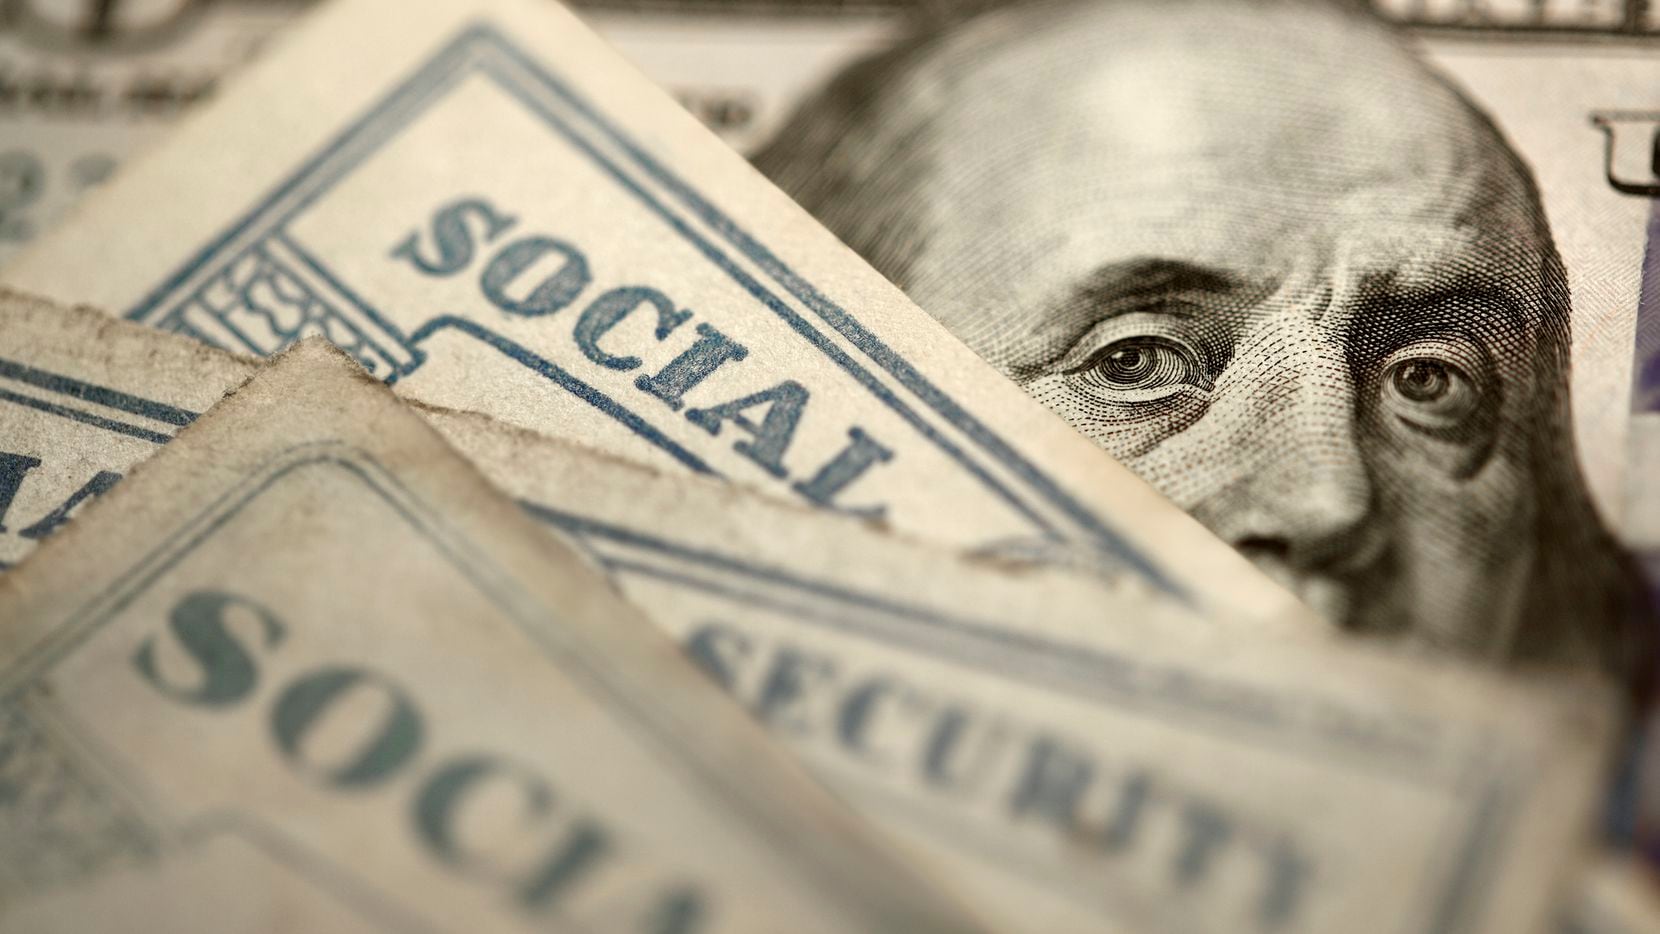 Many new folks are facing Social Security issues or decisions in their lives.